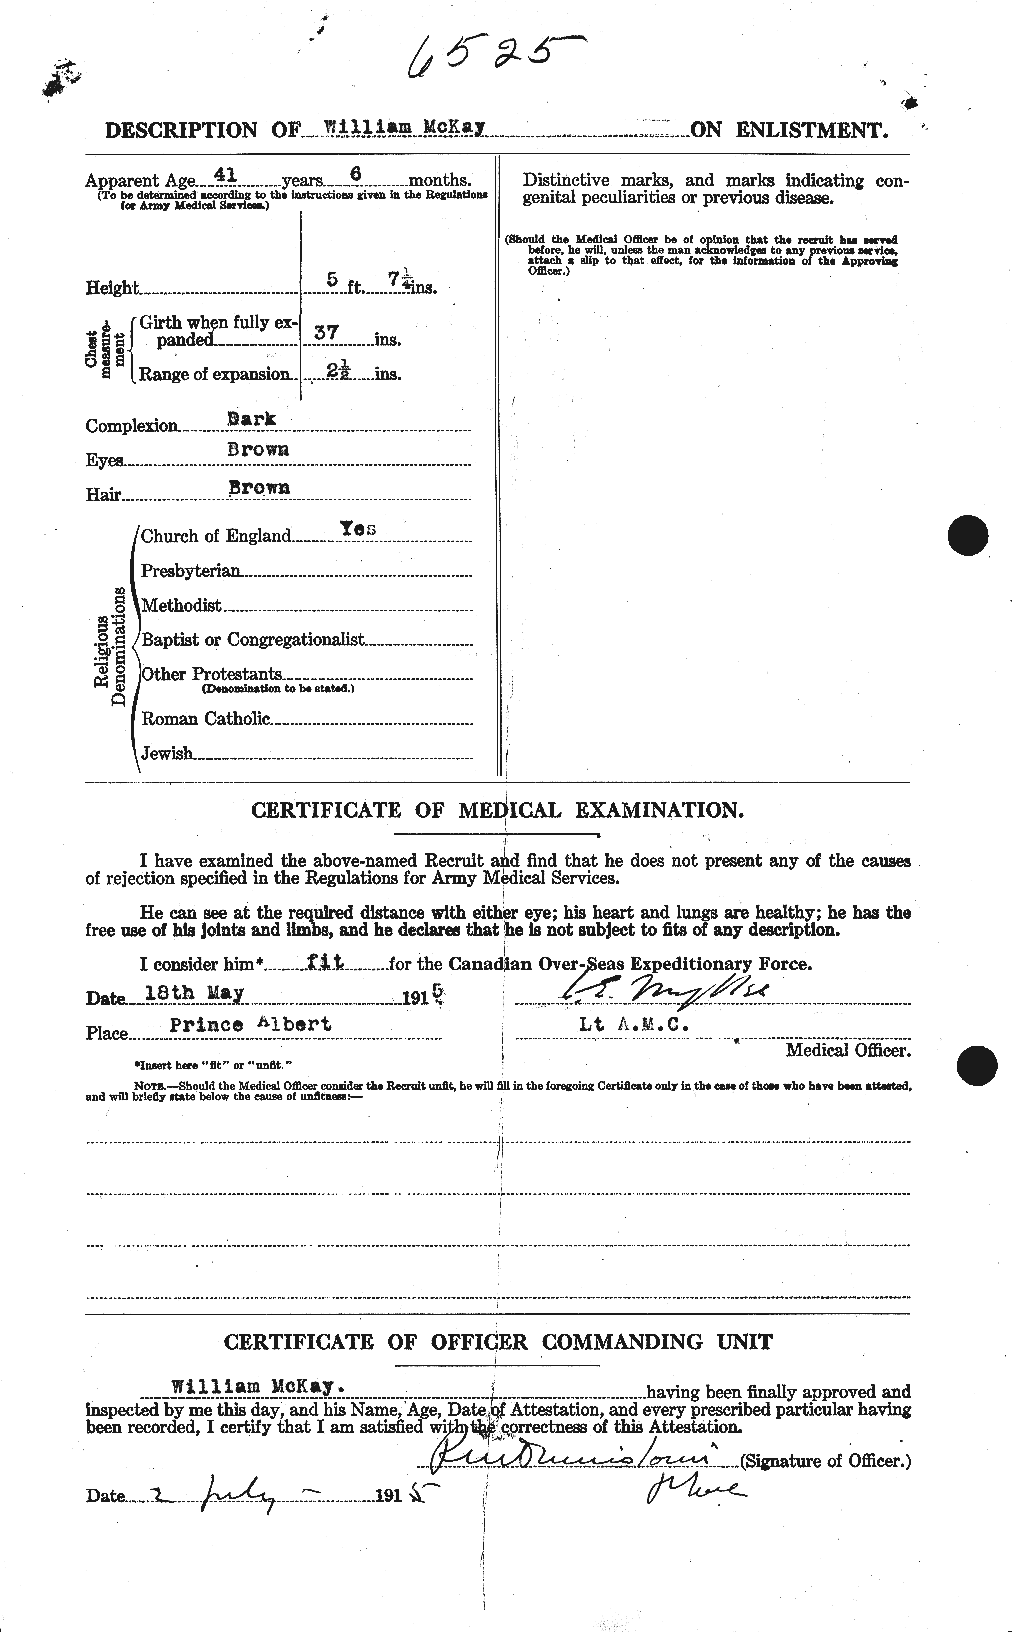 Personnel Records of the First World War - CEF 530209b